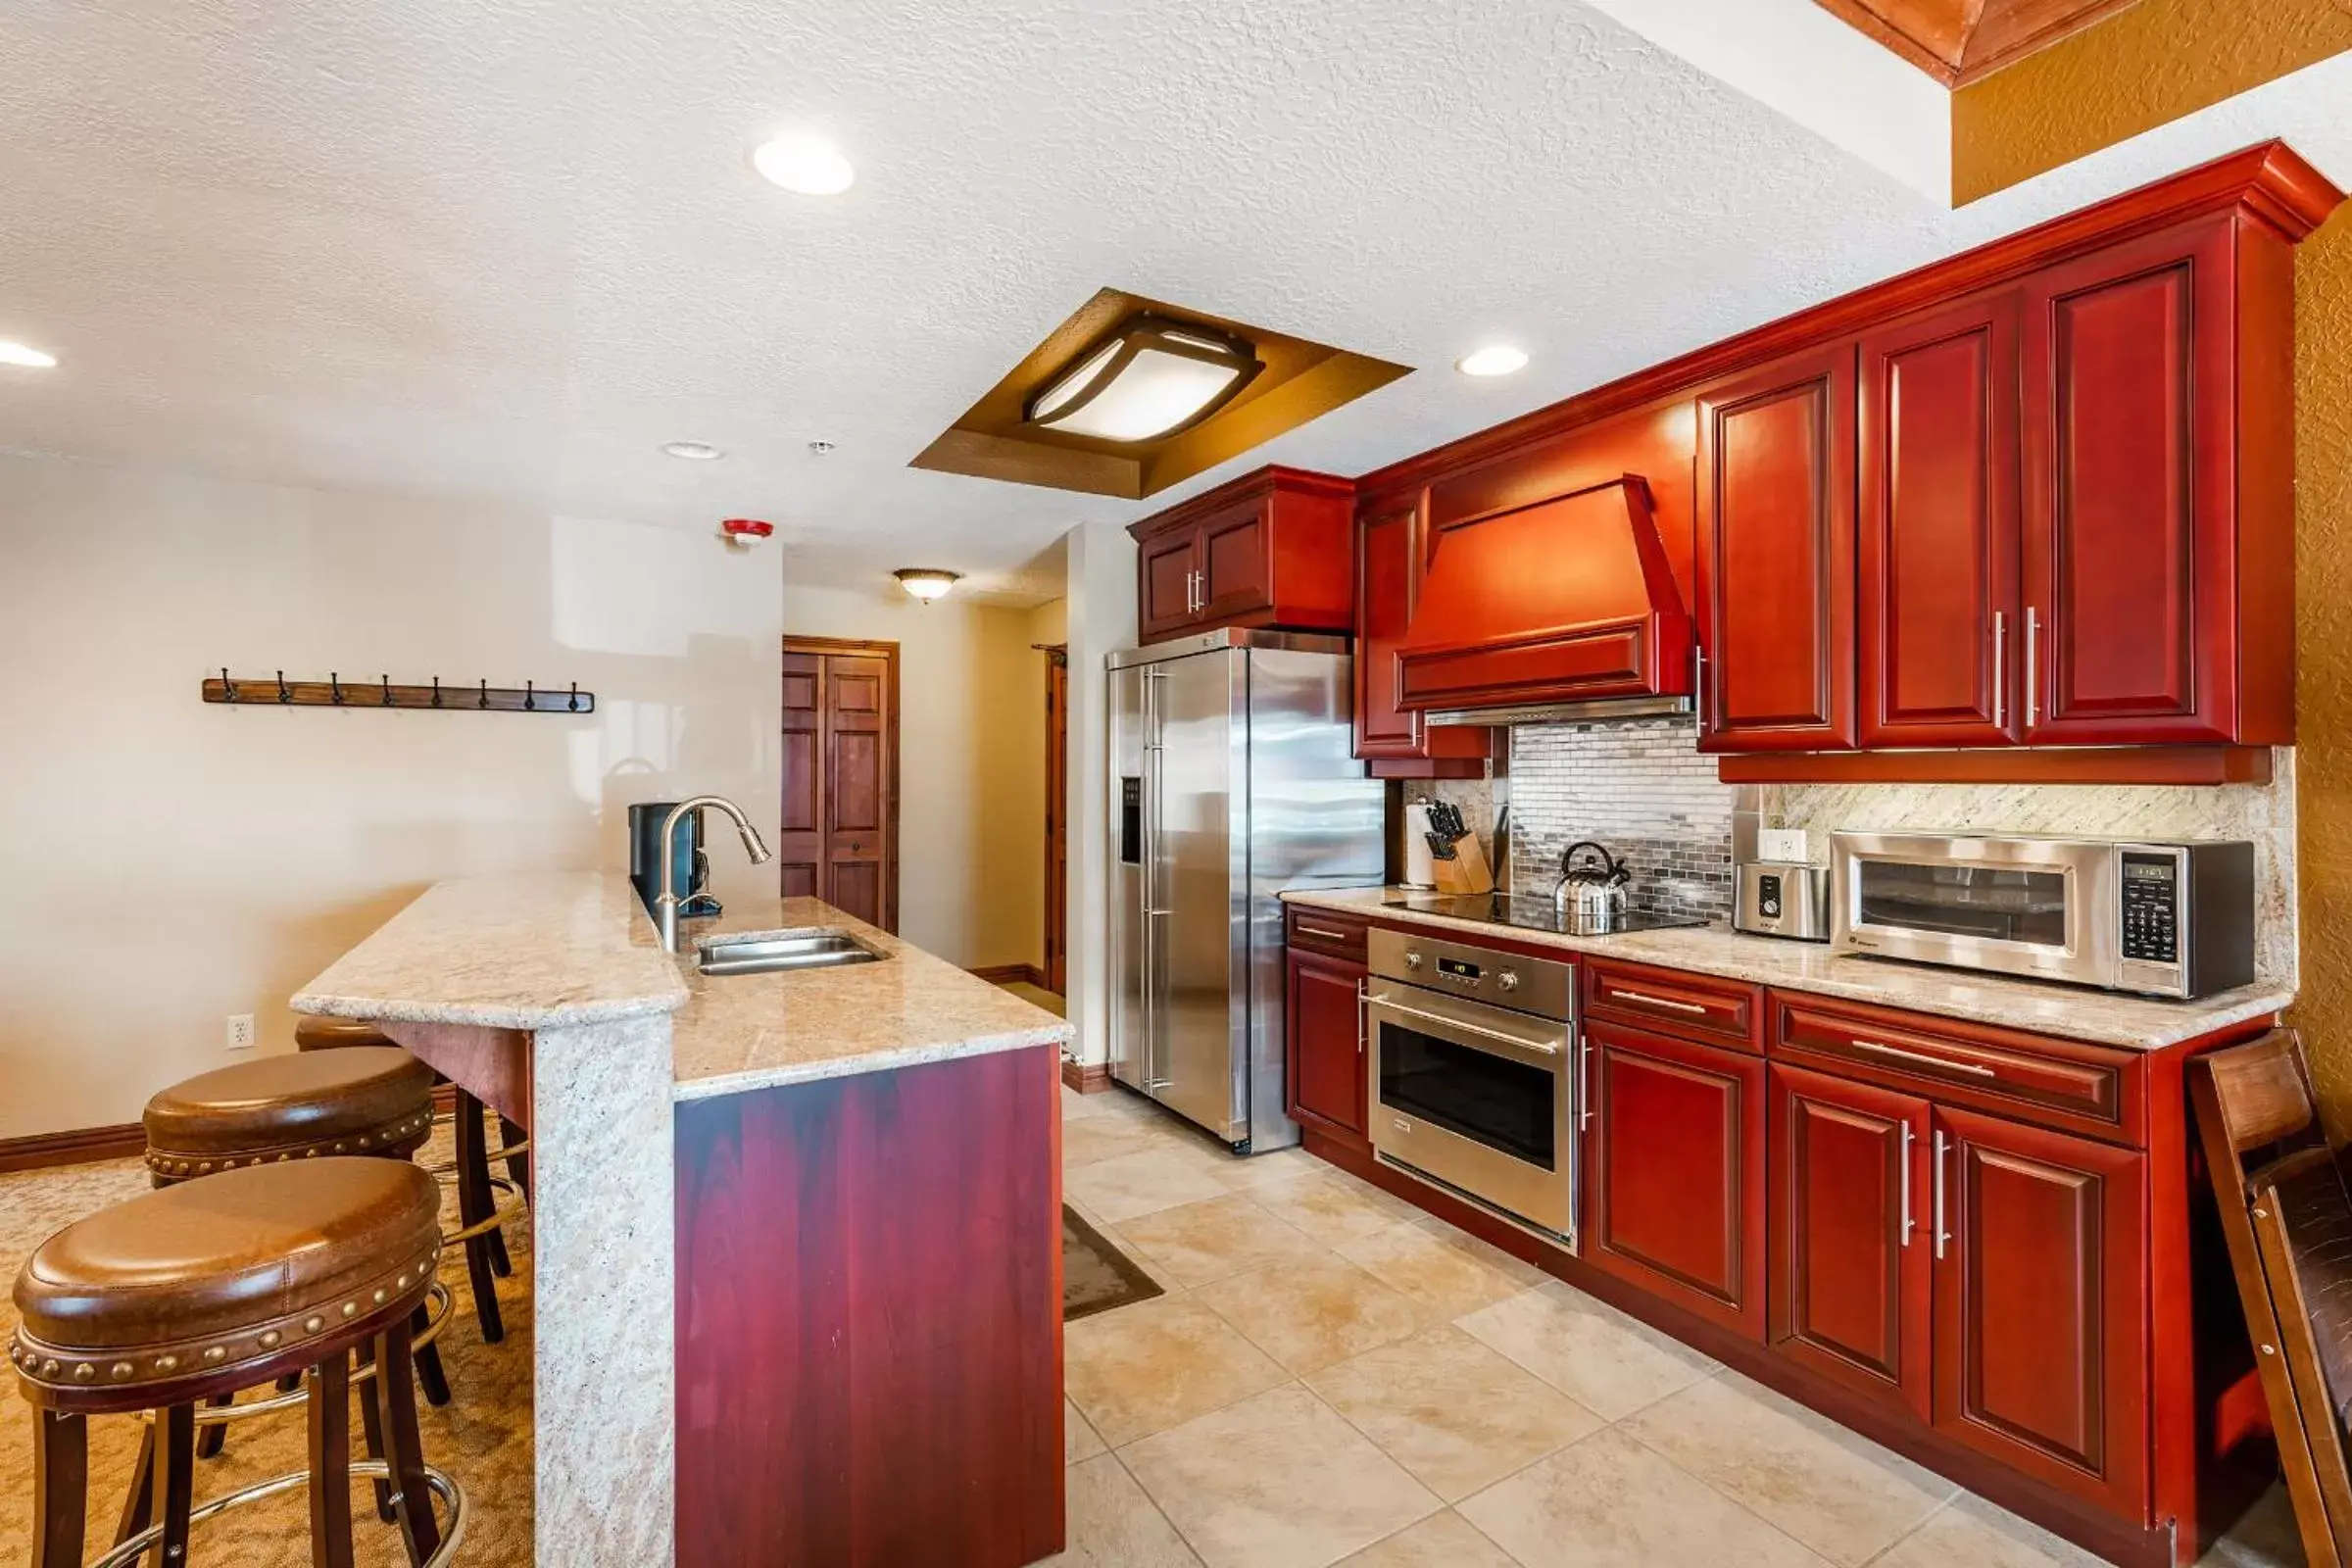 Kitchen/Kitchenette in Condos at Canyons Resort by White Pines